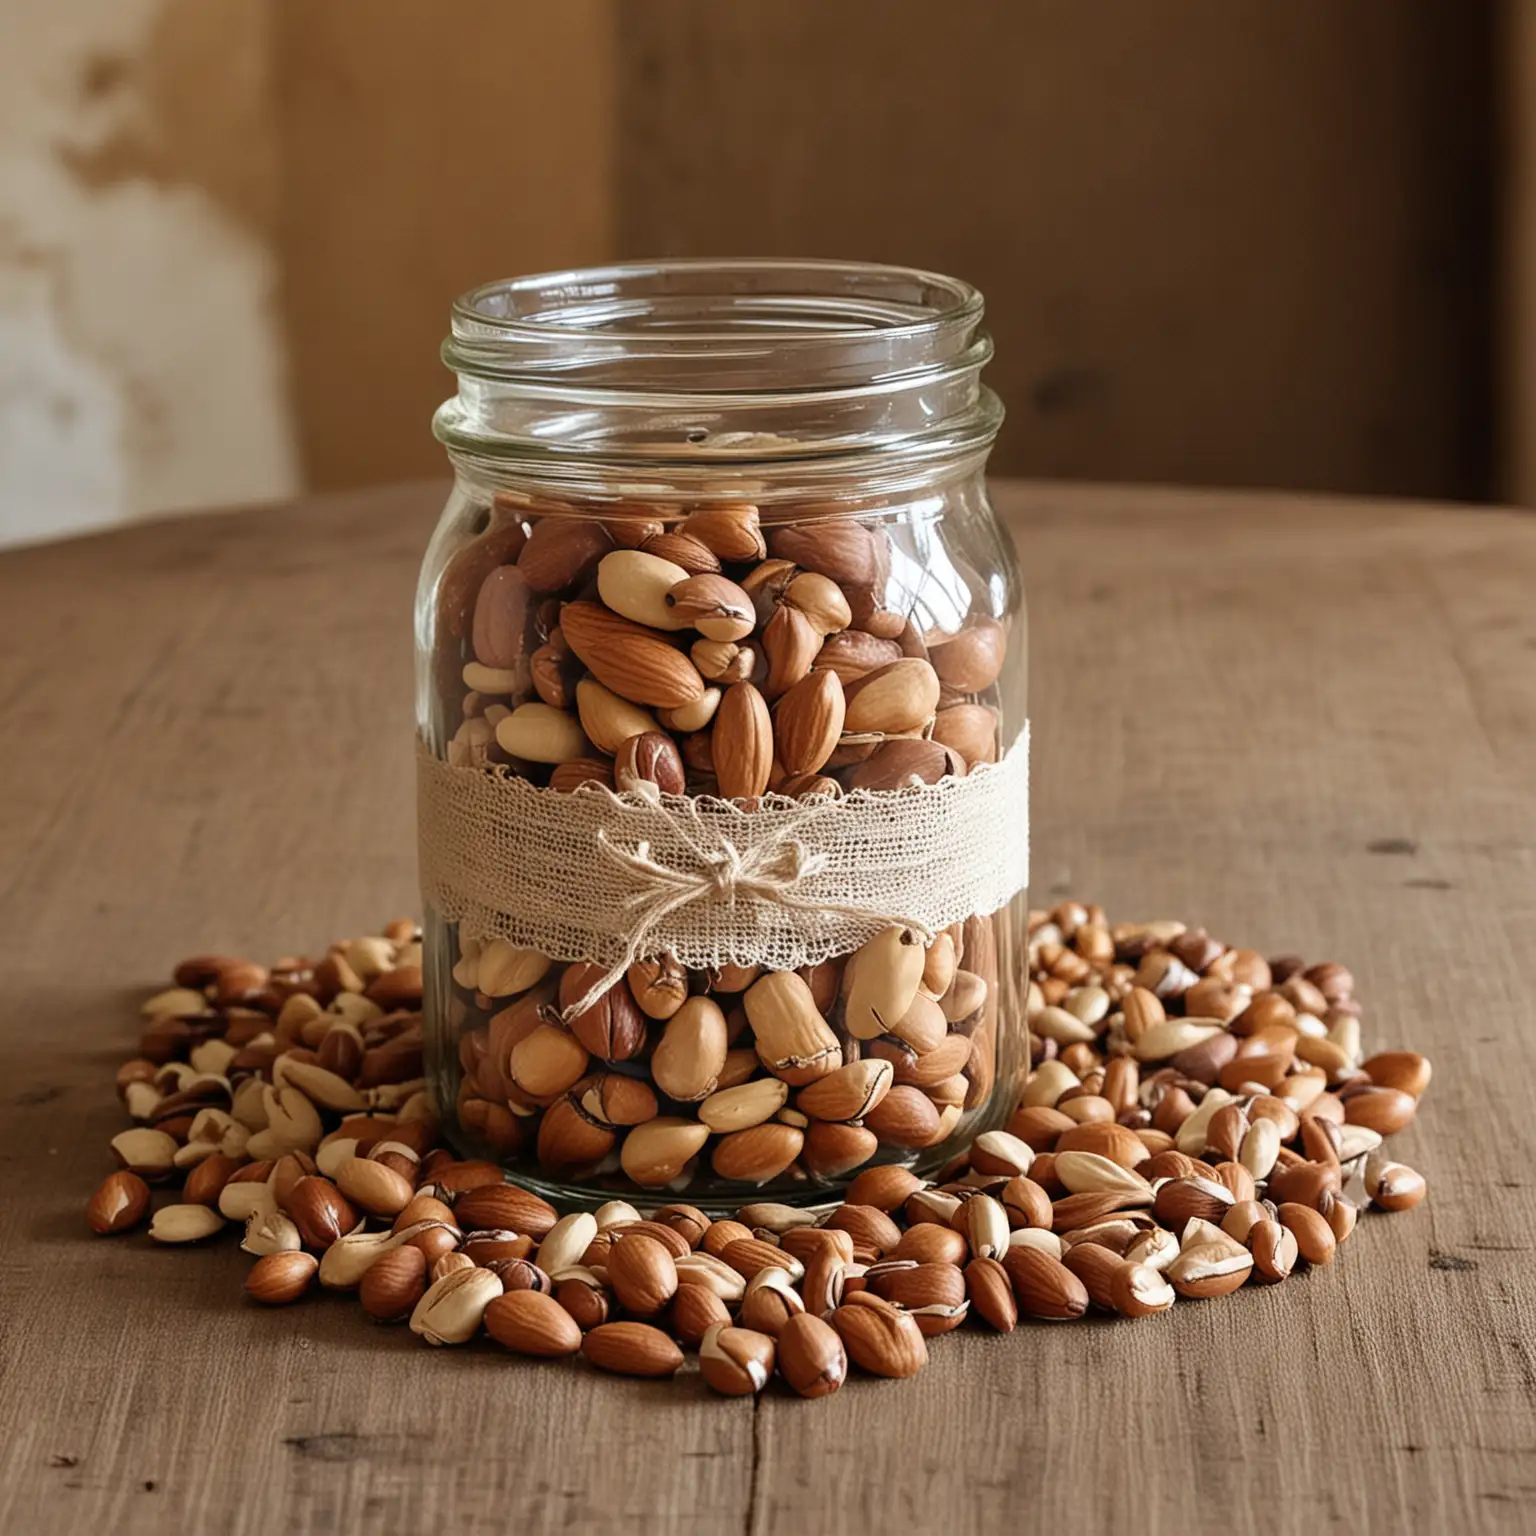 Rustic-Wedding-Centerpiece-Jar-Filled-with-Nuts